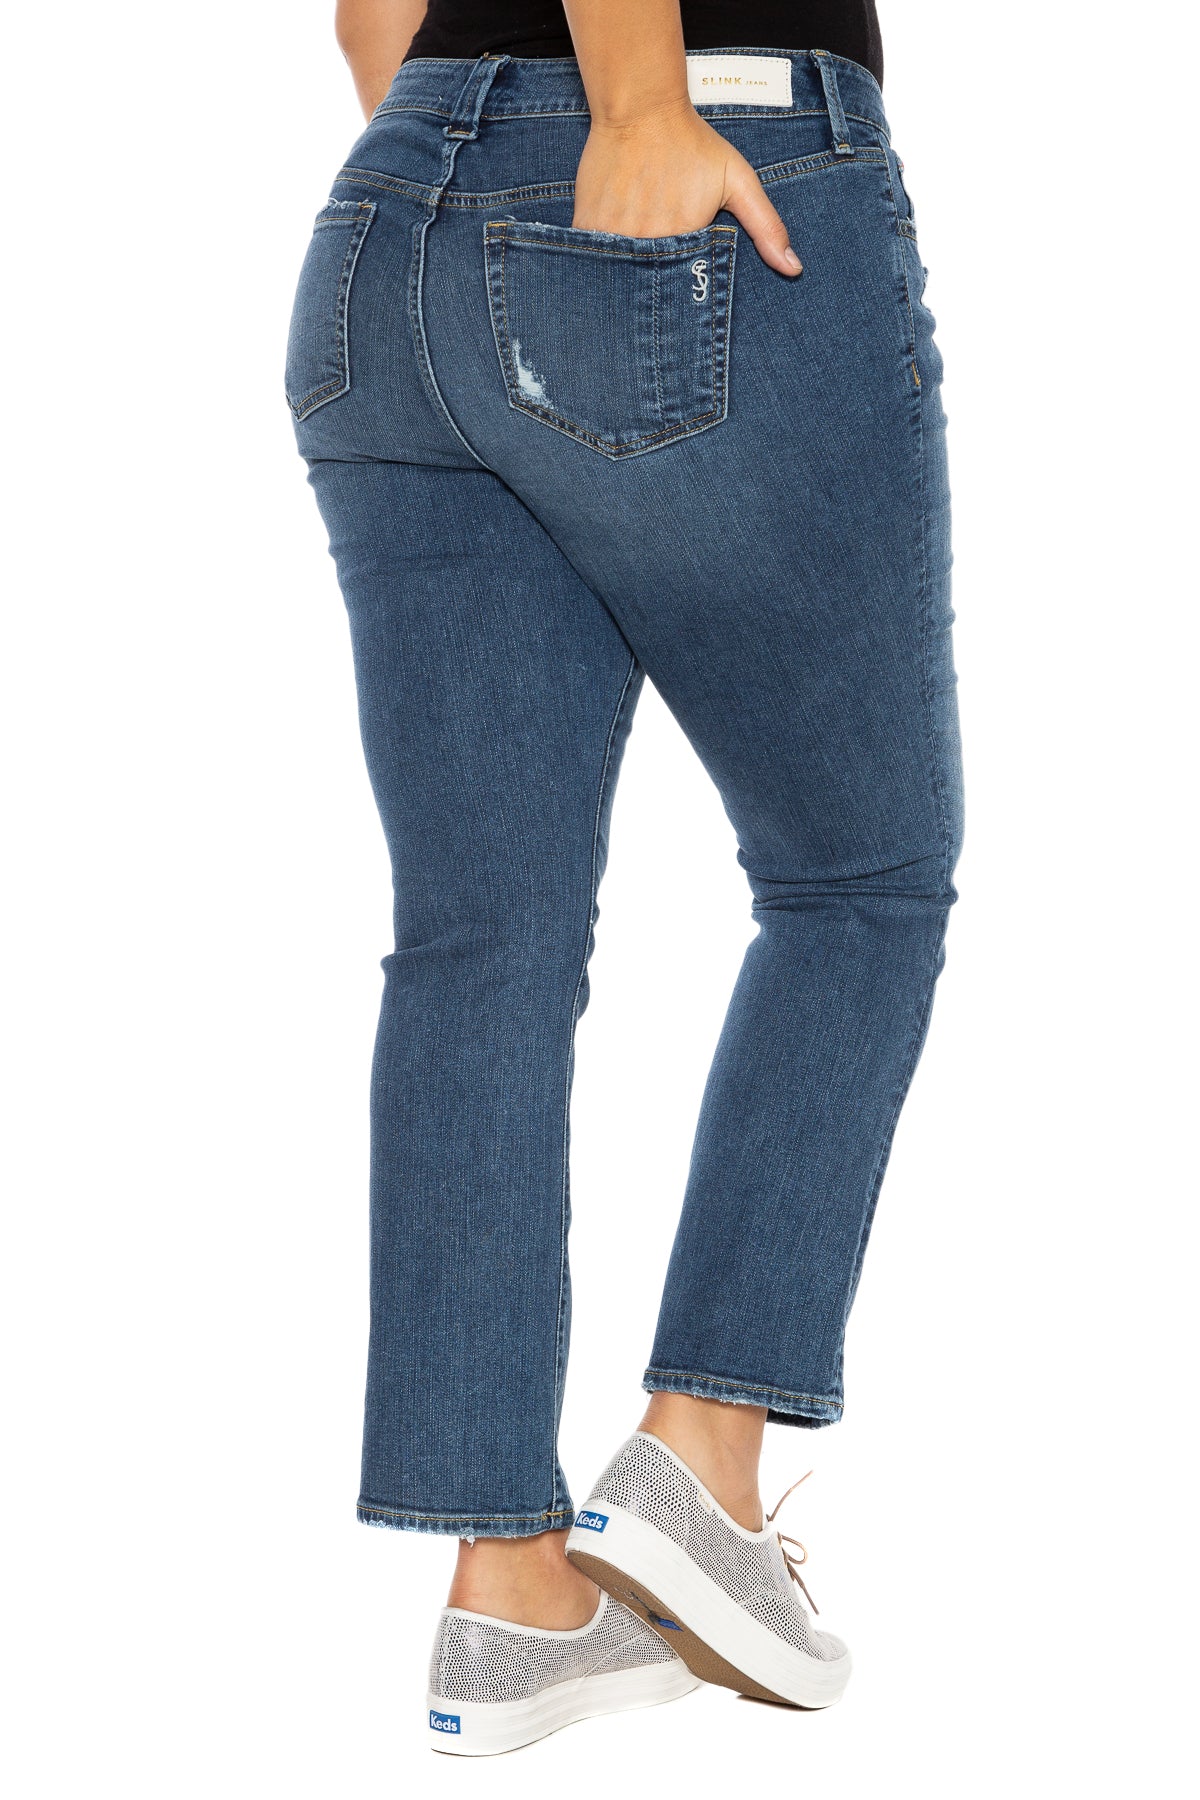 Mid Rise Bootcut - CASEY - SLINK JEANS